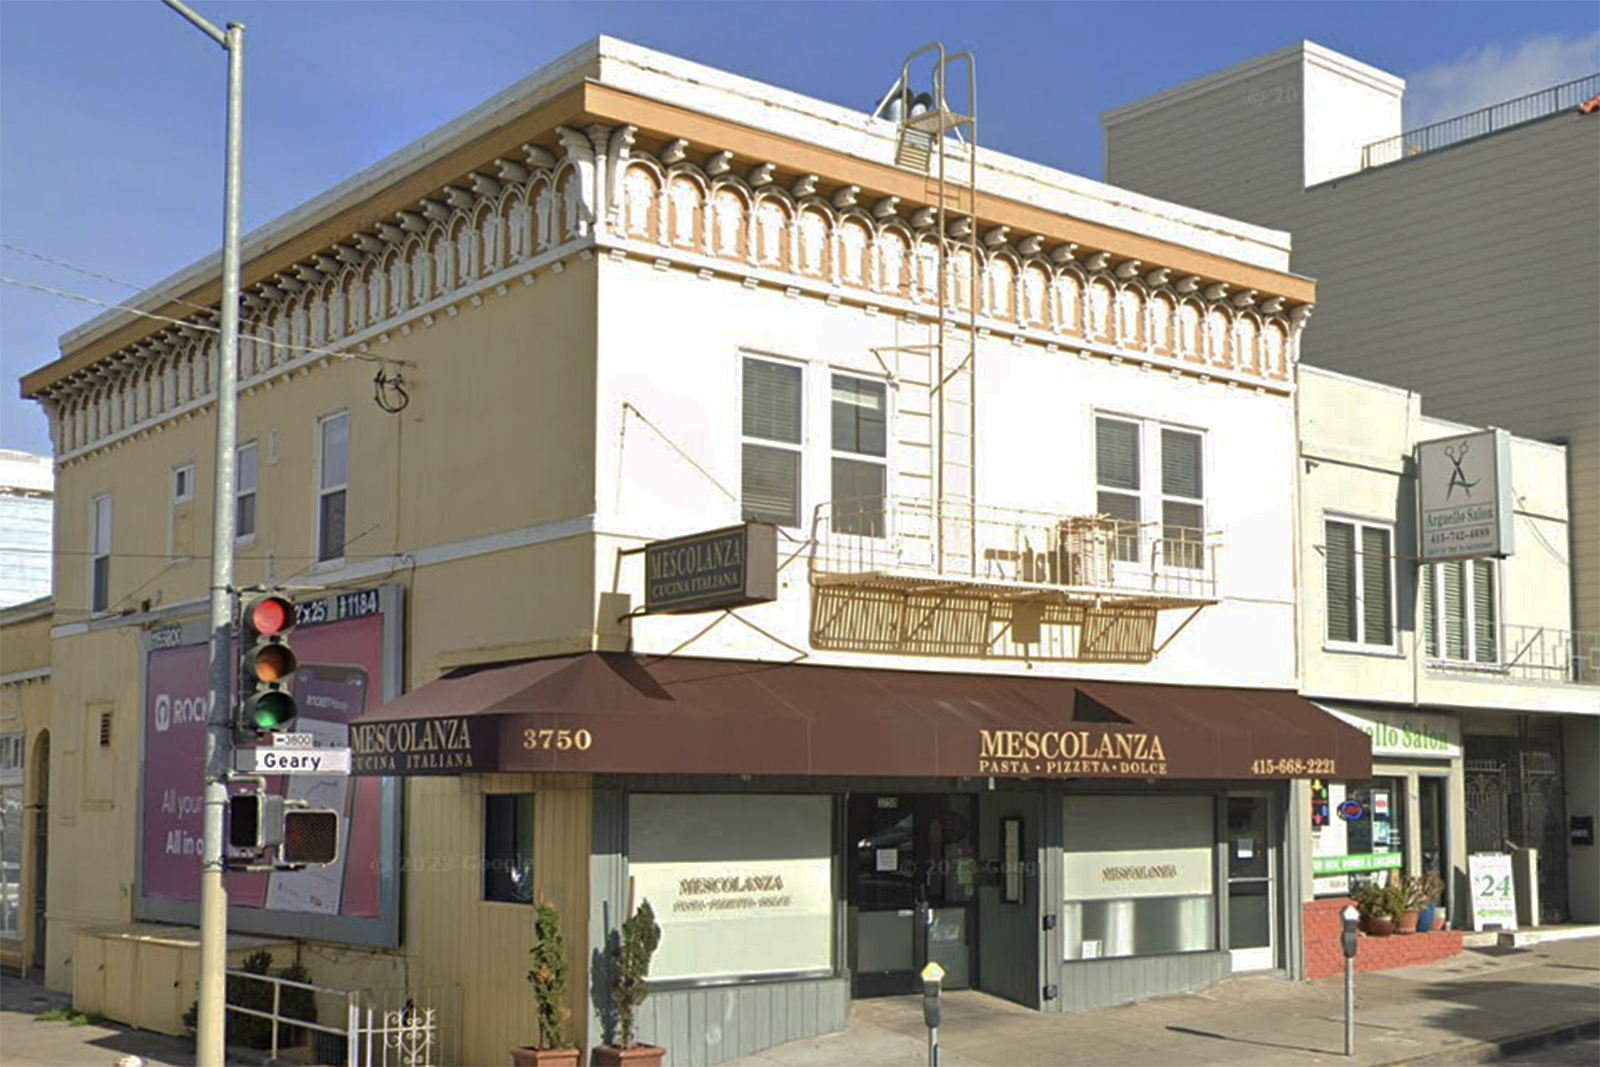 Thai Restaurant To Replace Beloved San Francisco Italian Joint